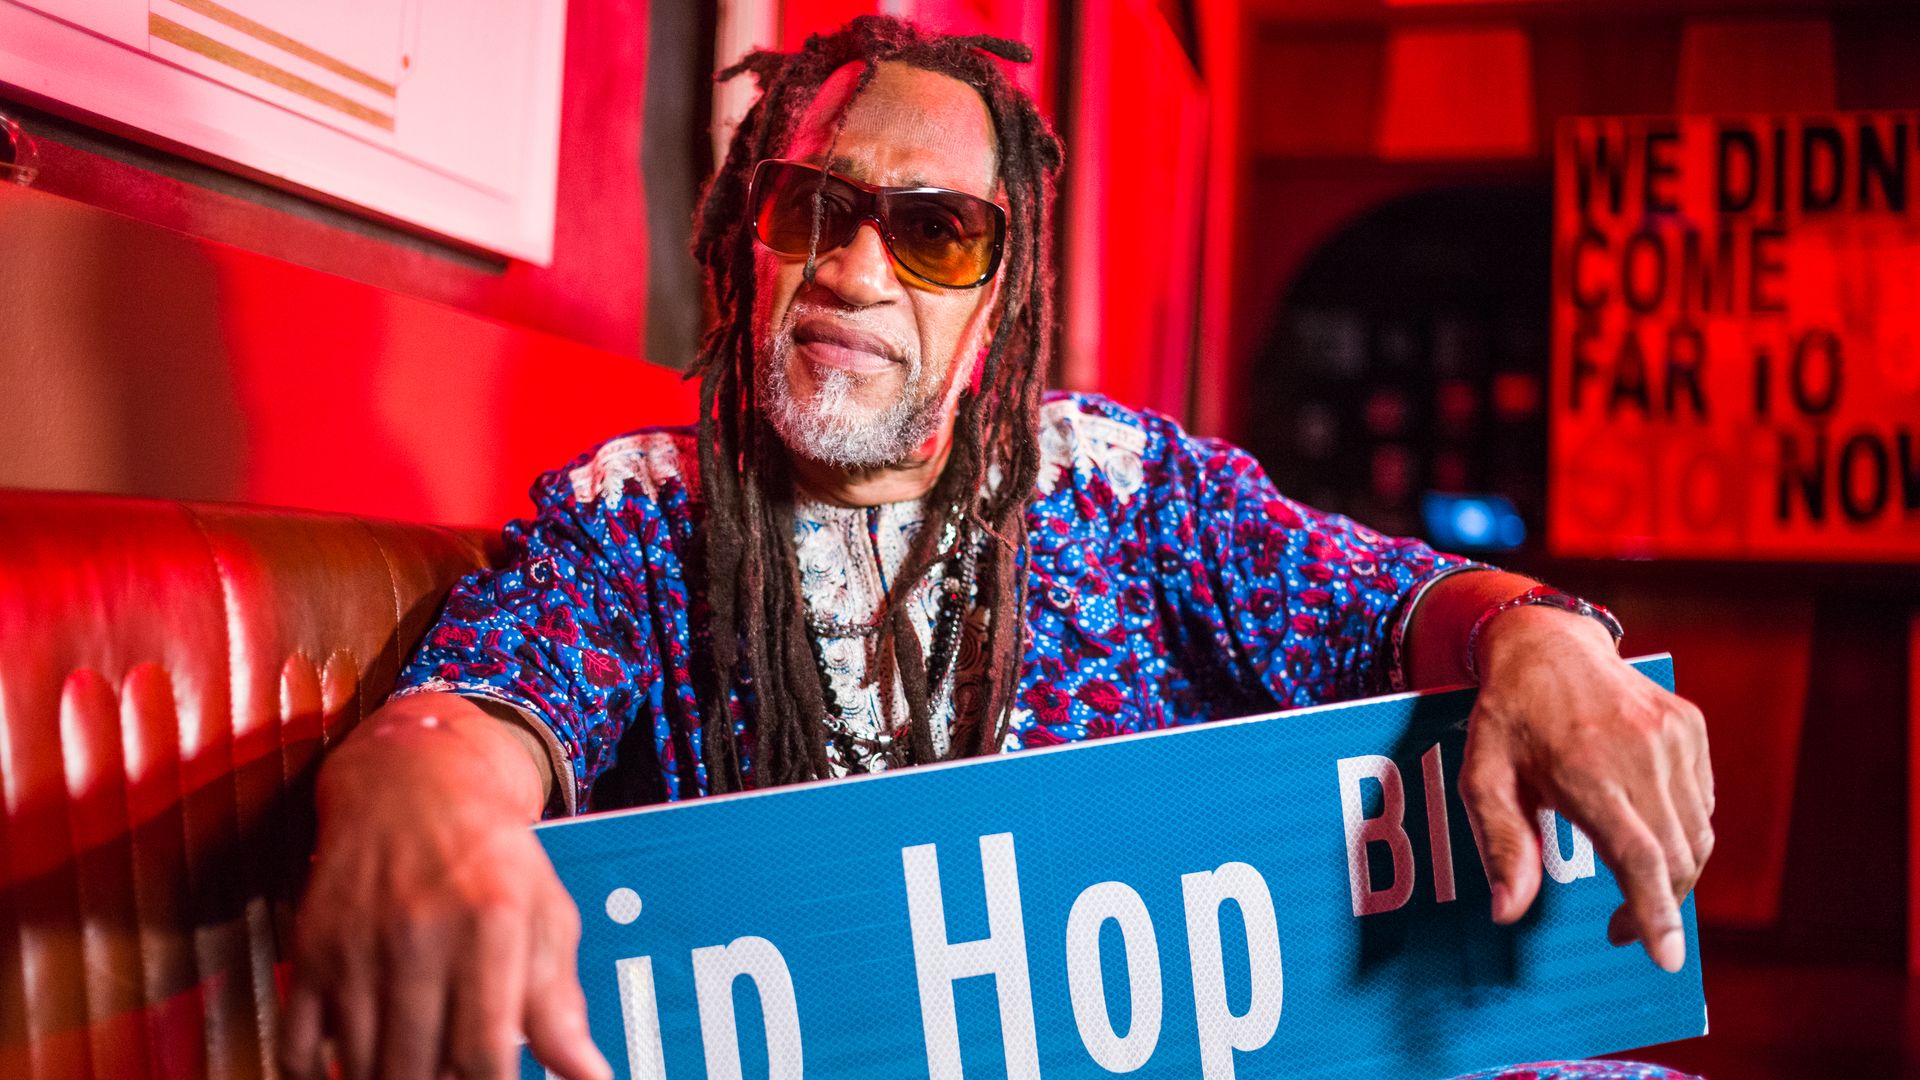 Photo shows DJ Kool Herc, the father of hip-hop, sitting on a leather couch and holding a sign that says "Hip Hop Blvd."